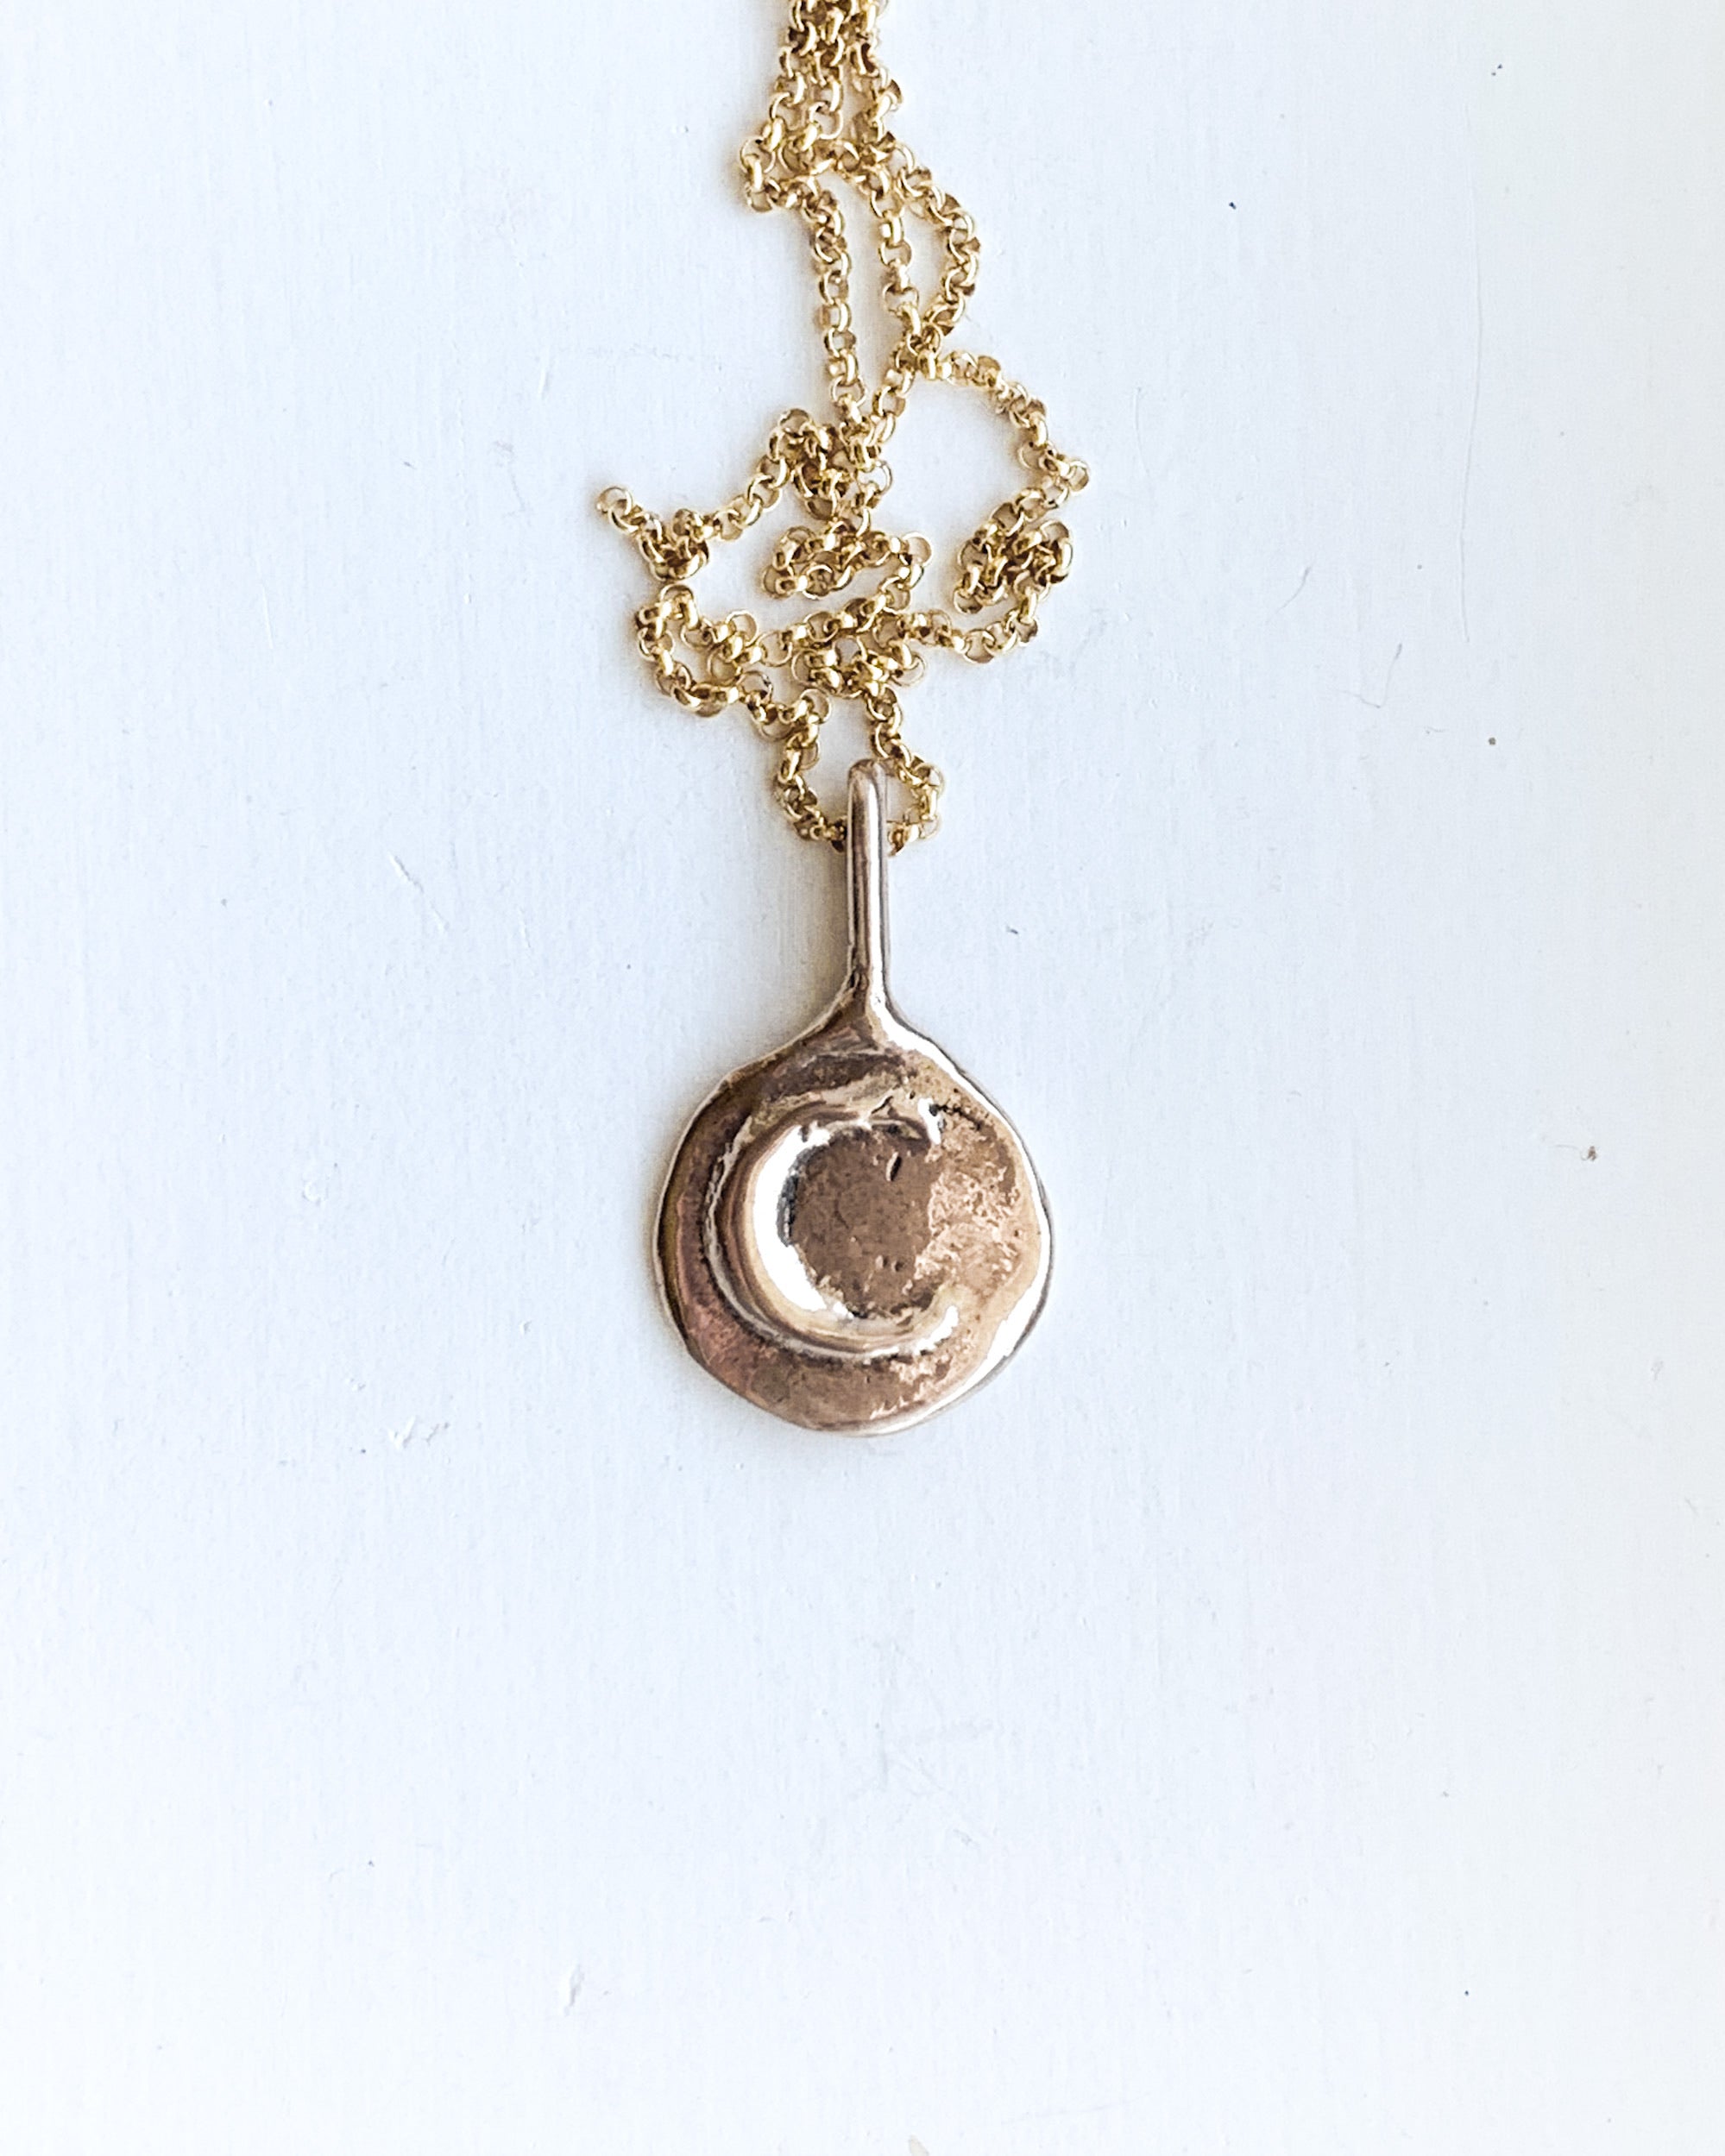 a hand formed bronze moon pendant with a gold chain on a white backgroud